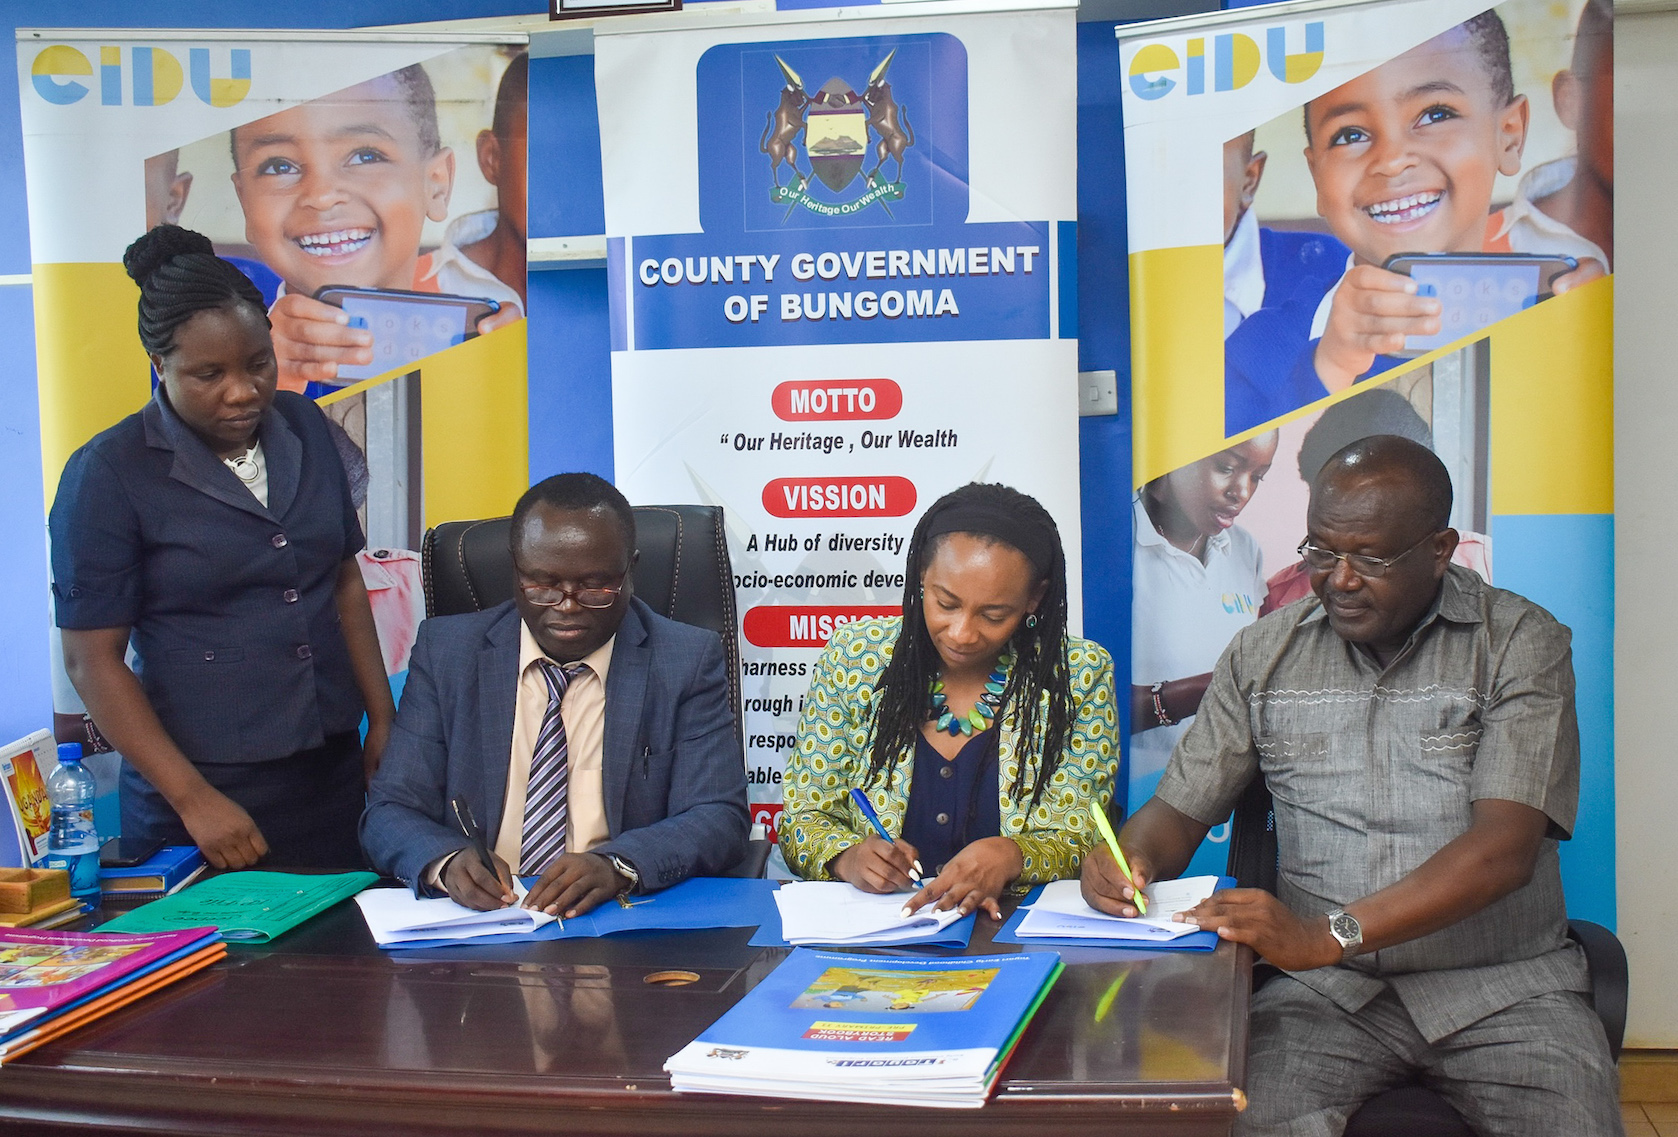 Dr. David Wanyonyi Bungoma CECM for Education and Vocational Training (second left) and EIDU Head of Government Relations, Salome Mwaura (second right) sign a contract to begin the implementation of EIDU’s digital learning program targeting over 3,000 learners from 36 Early Childhood Development and Education (ECDE) centres across the county. They are flanked by Abigael Walaka, Legal Officer, County Attorney office (left) and Nicholas Misoi, Chief Officer-Education. Over 230,000 learners from seven counties across Kenya are already using the program.